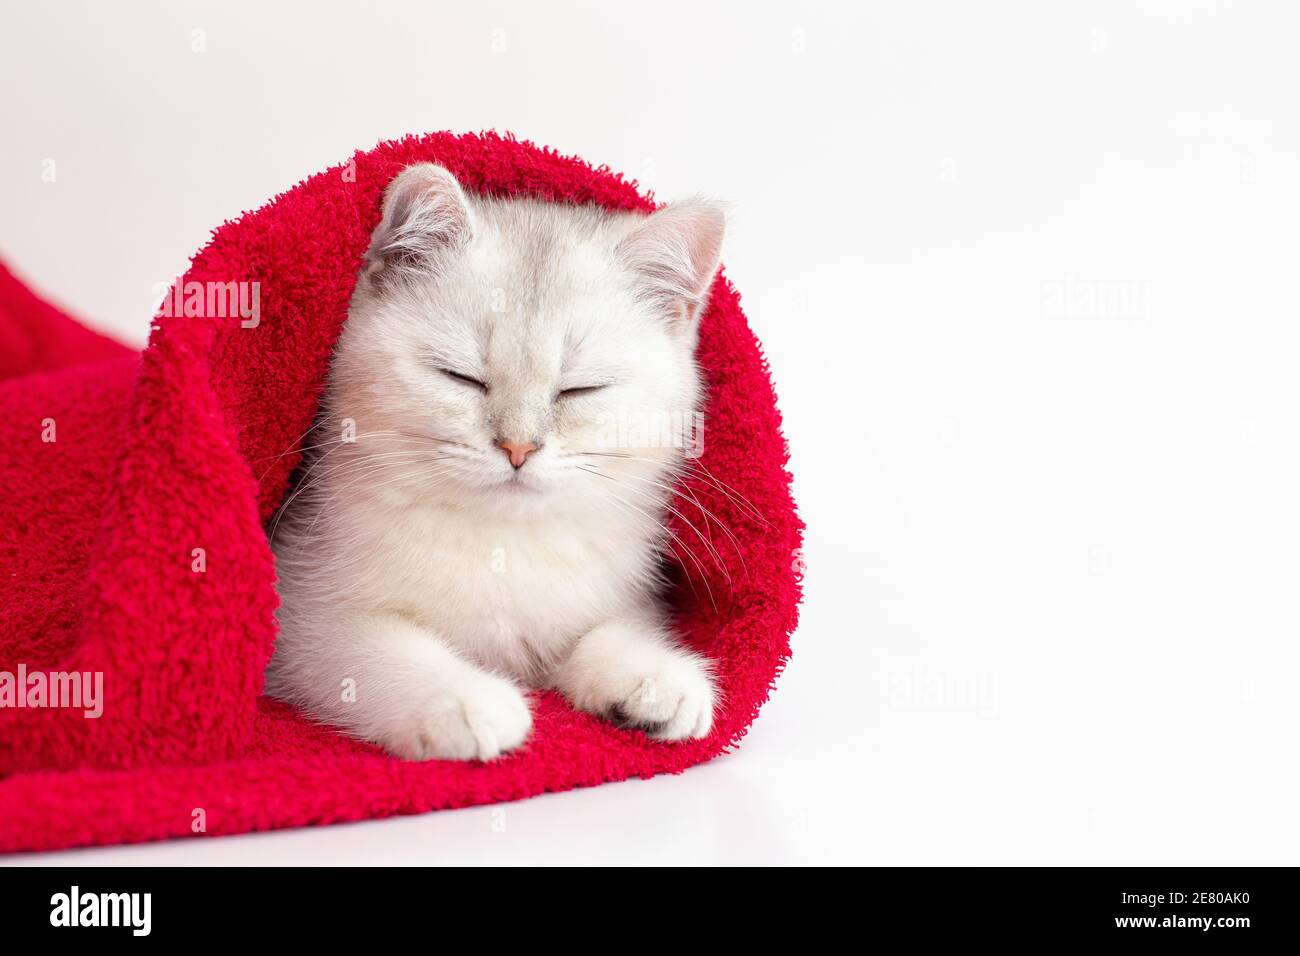 white british cat sleeping in a red towel on a white background Stock Photo